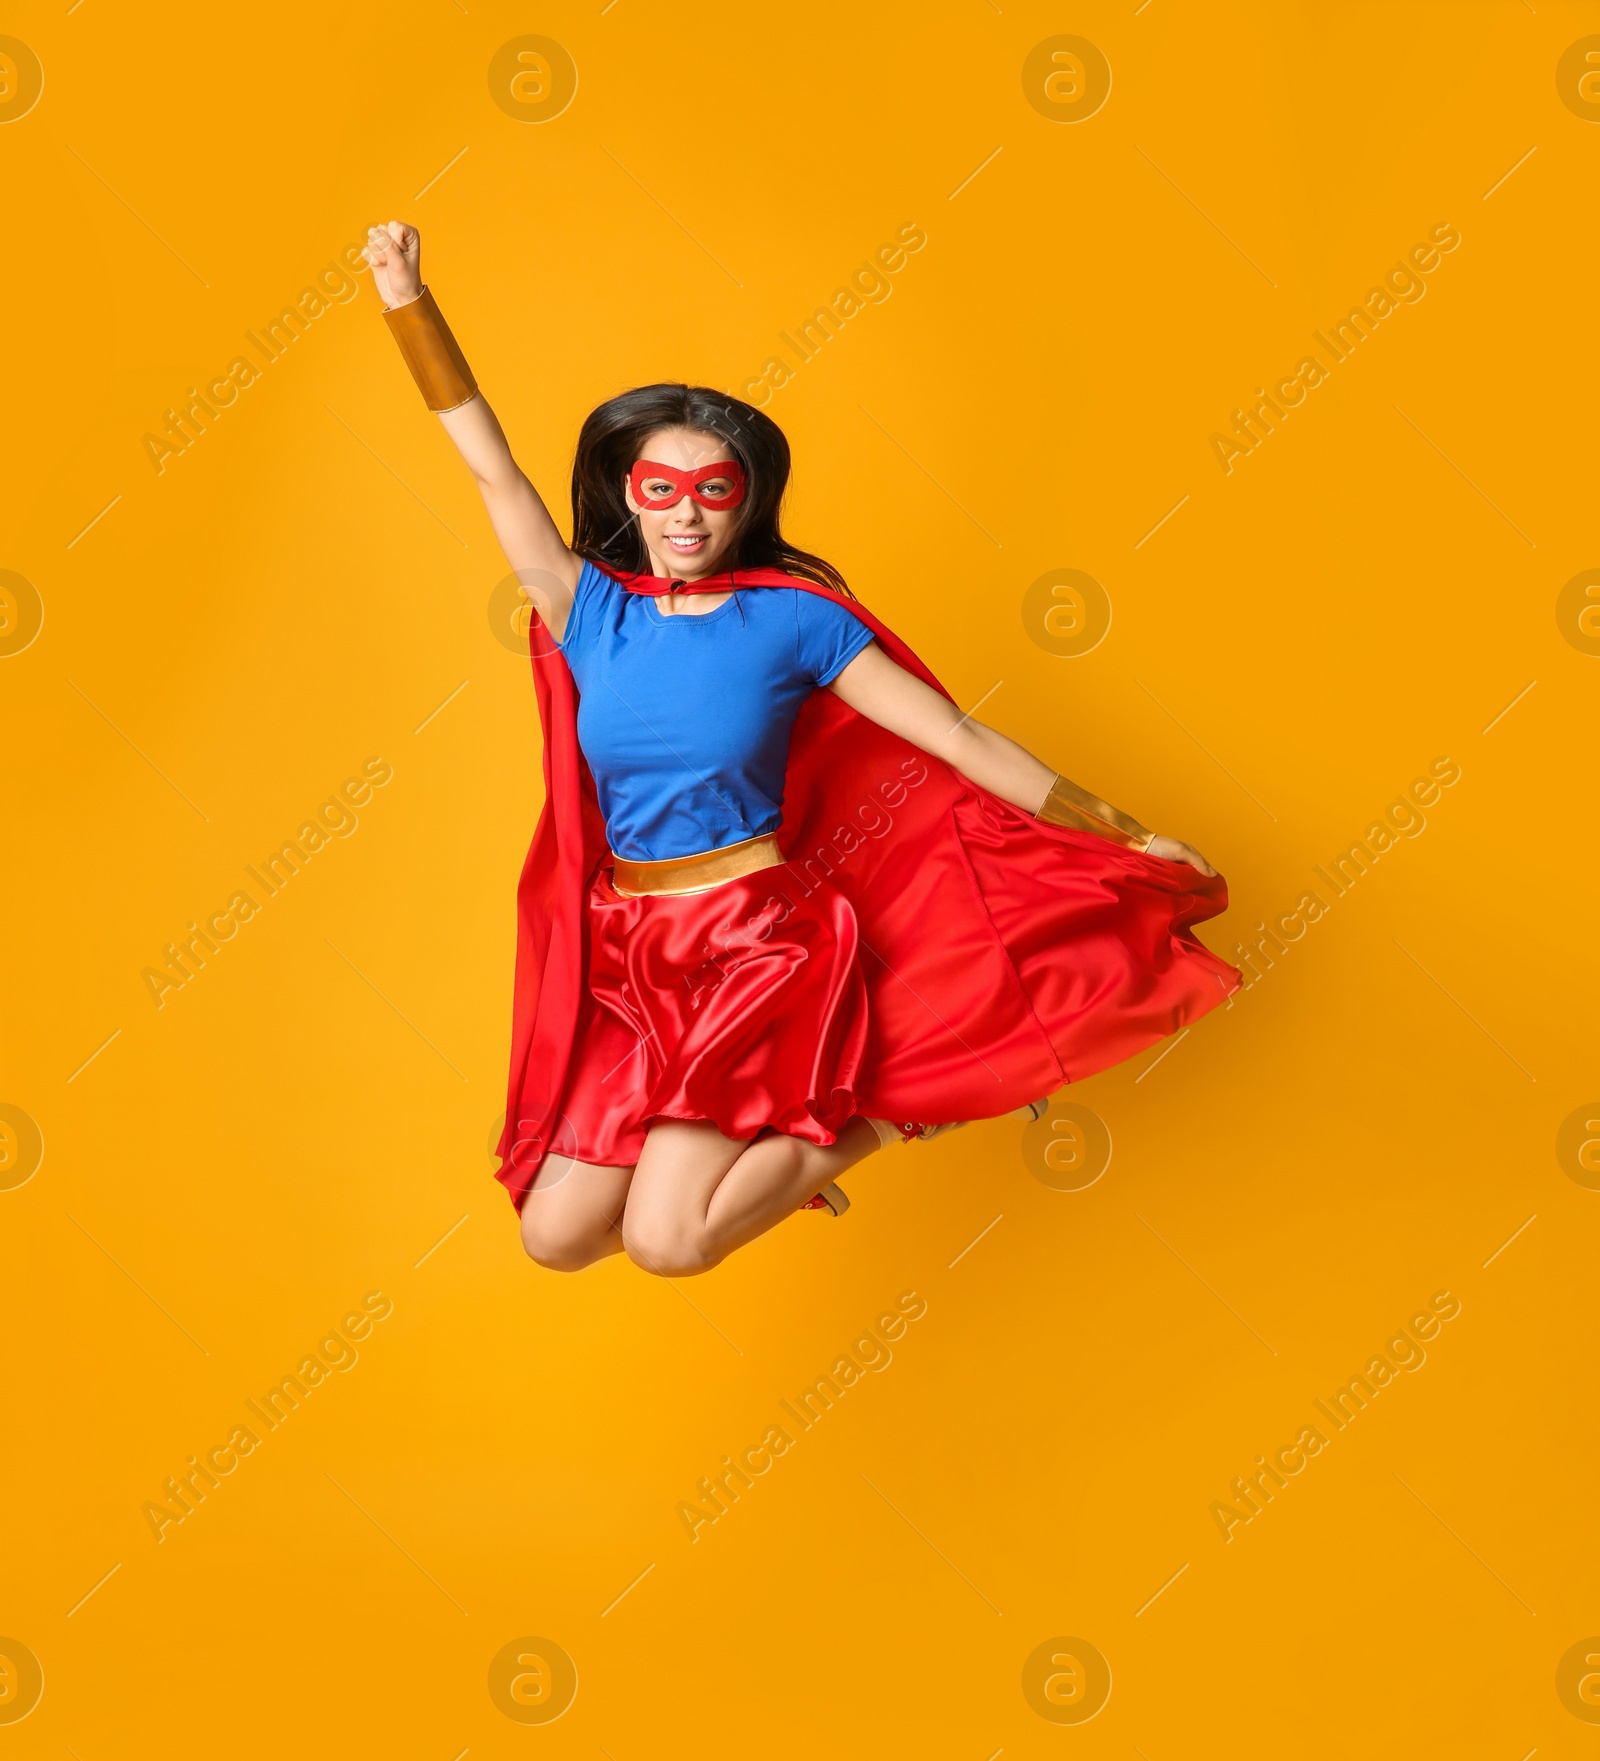 Photo of Confident young woman in superhero costume jumping on orange background